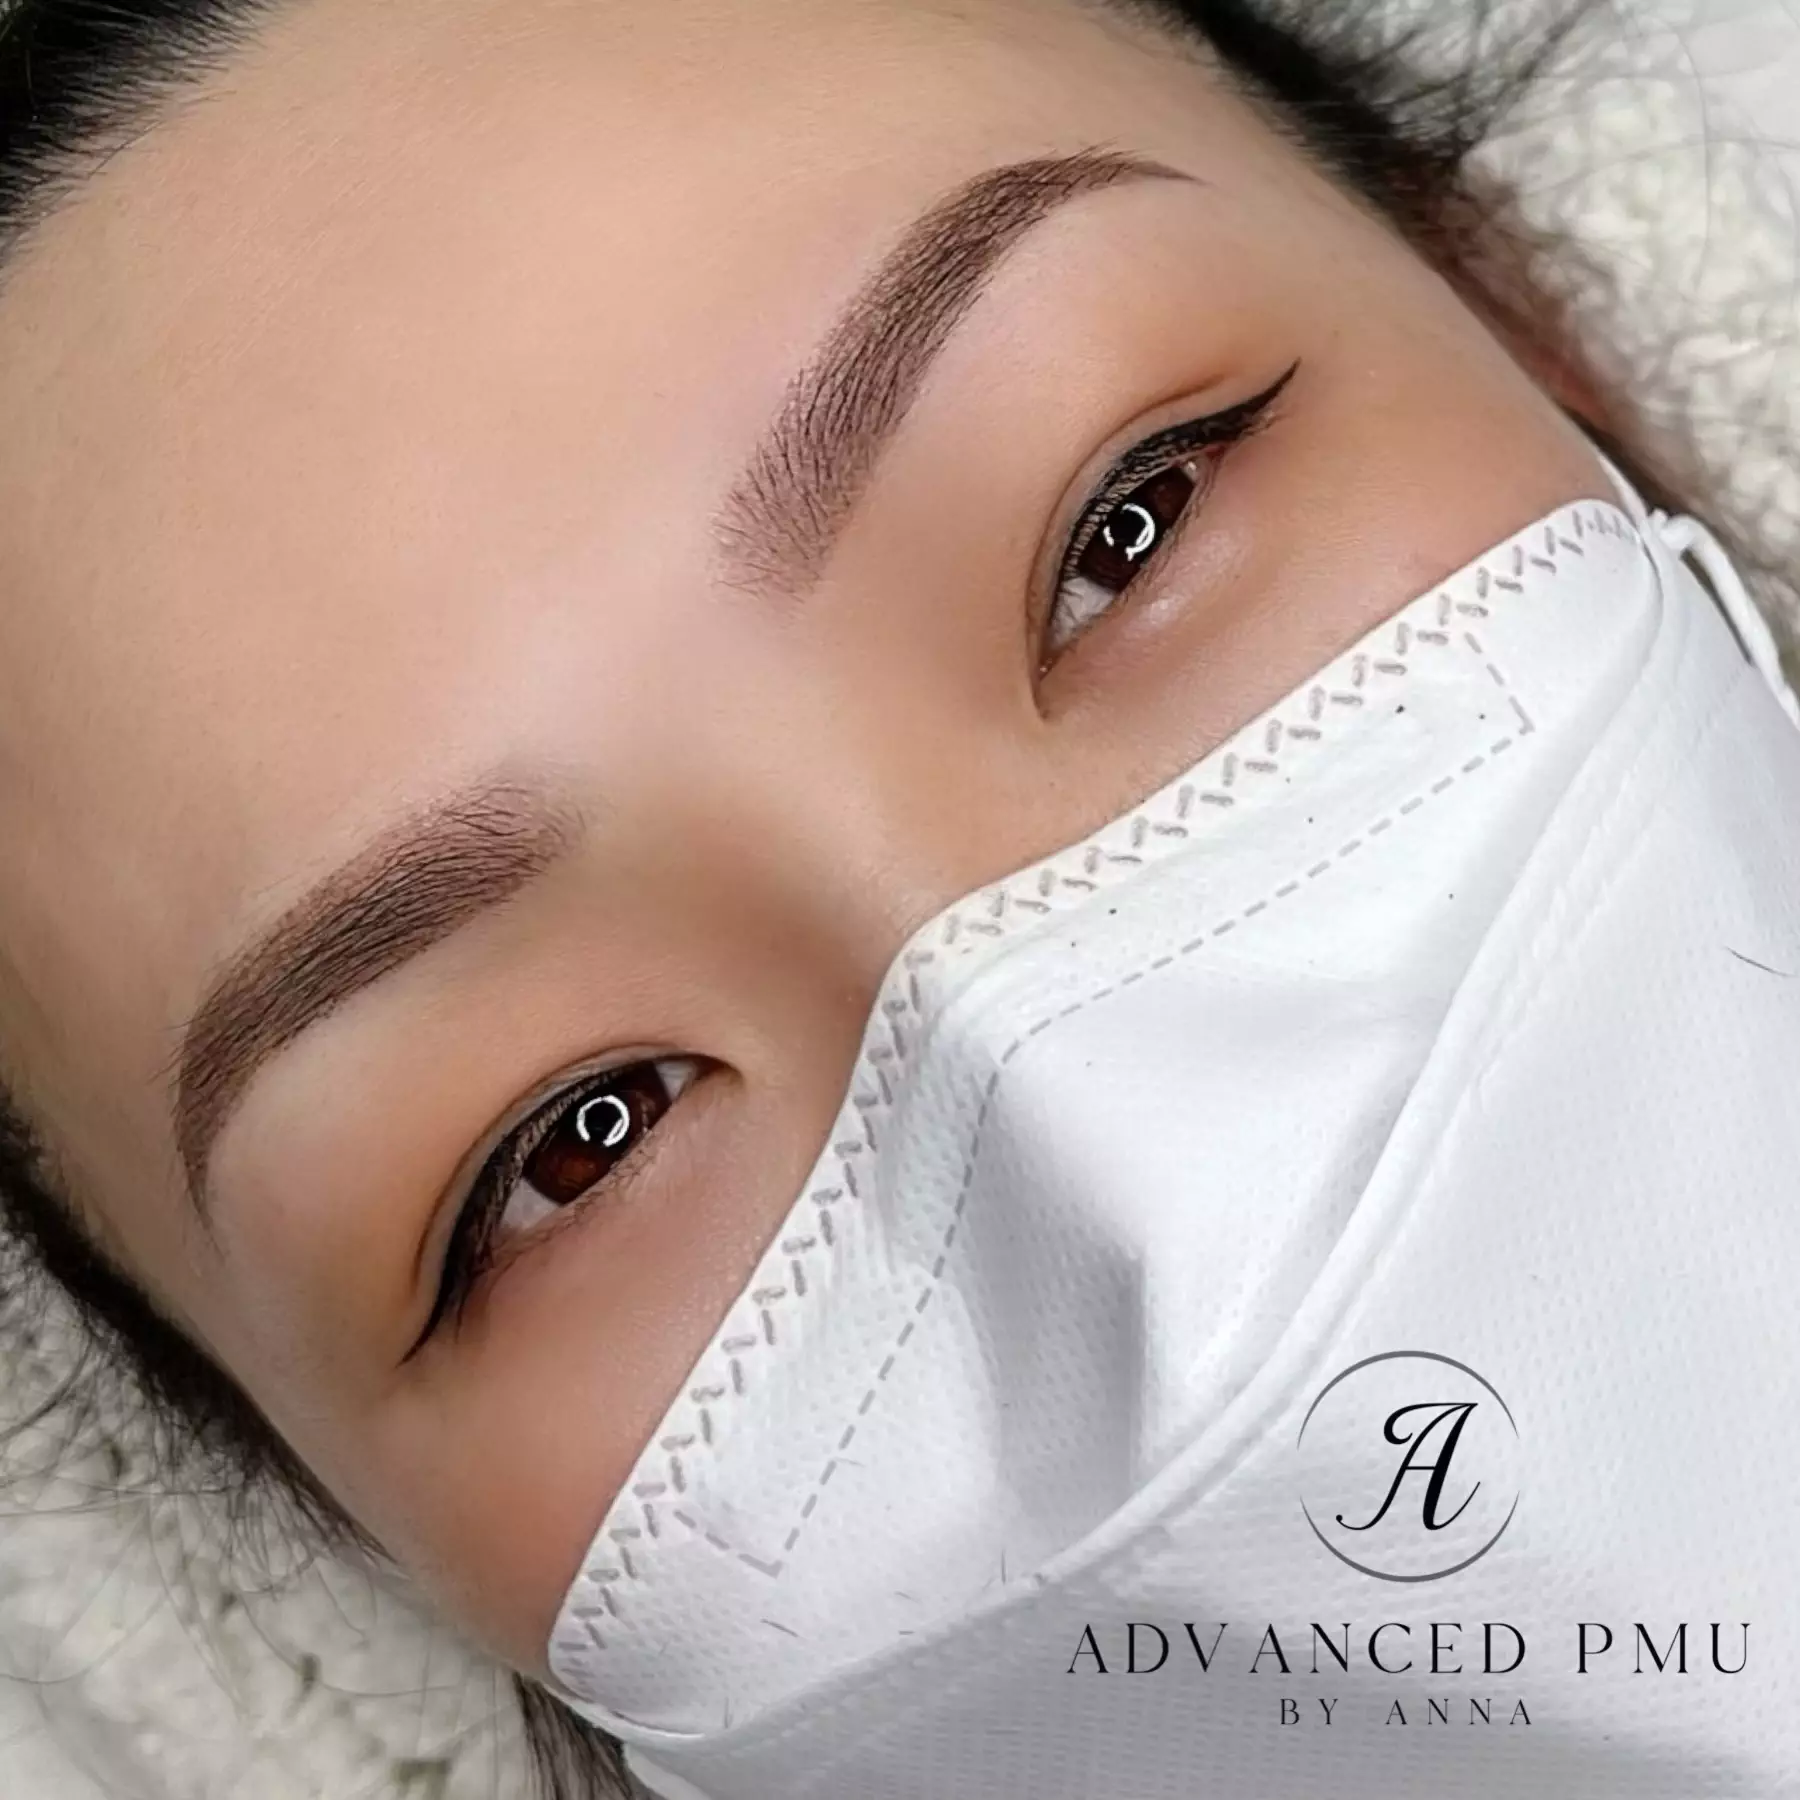 Woman who got Permanent Makeup Eyeliner and Eyeliner